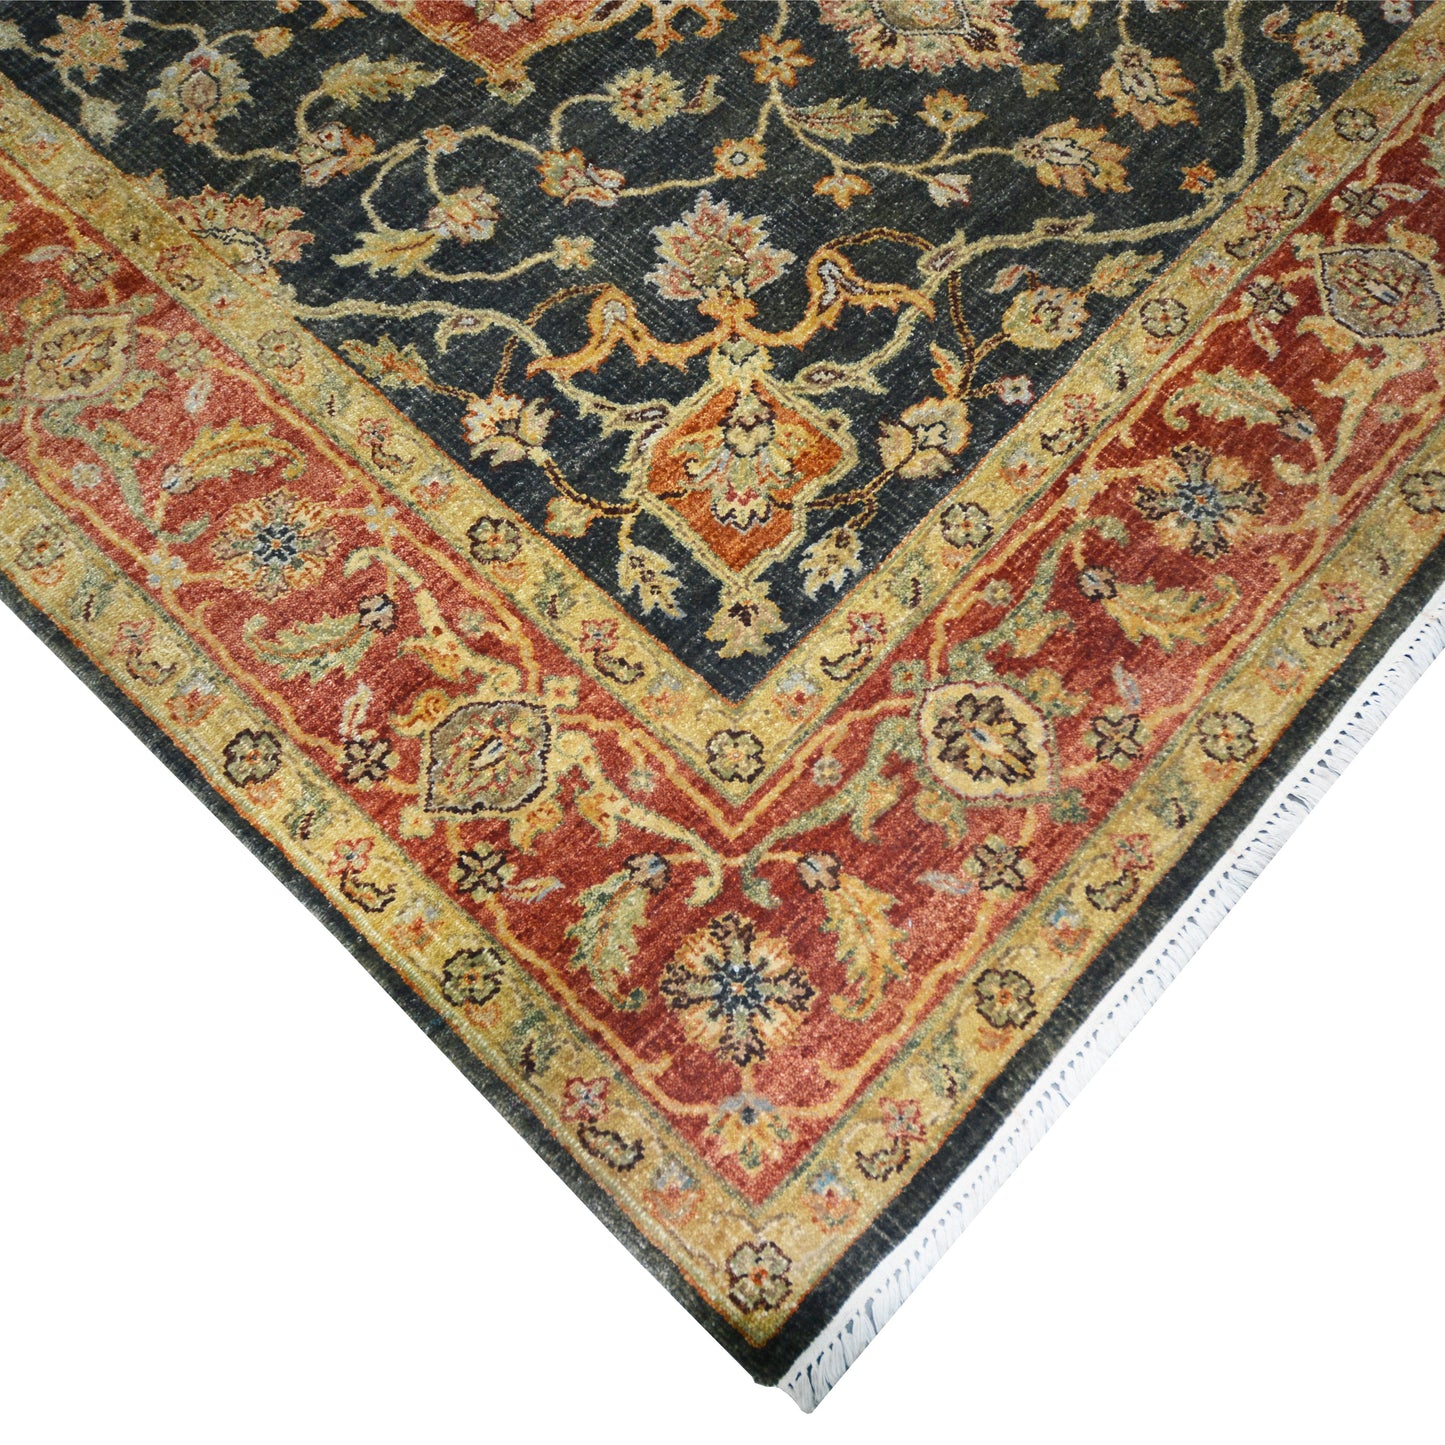 Get trendy with Garden Black, Red and Gold Traditional Heriz Pure Wool Handknotted Area Rug - Traditional Rugs available at Jaipur Oriental Rugs. Grab yours for $3345.00 today!